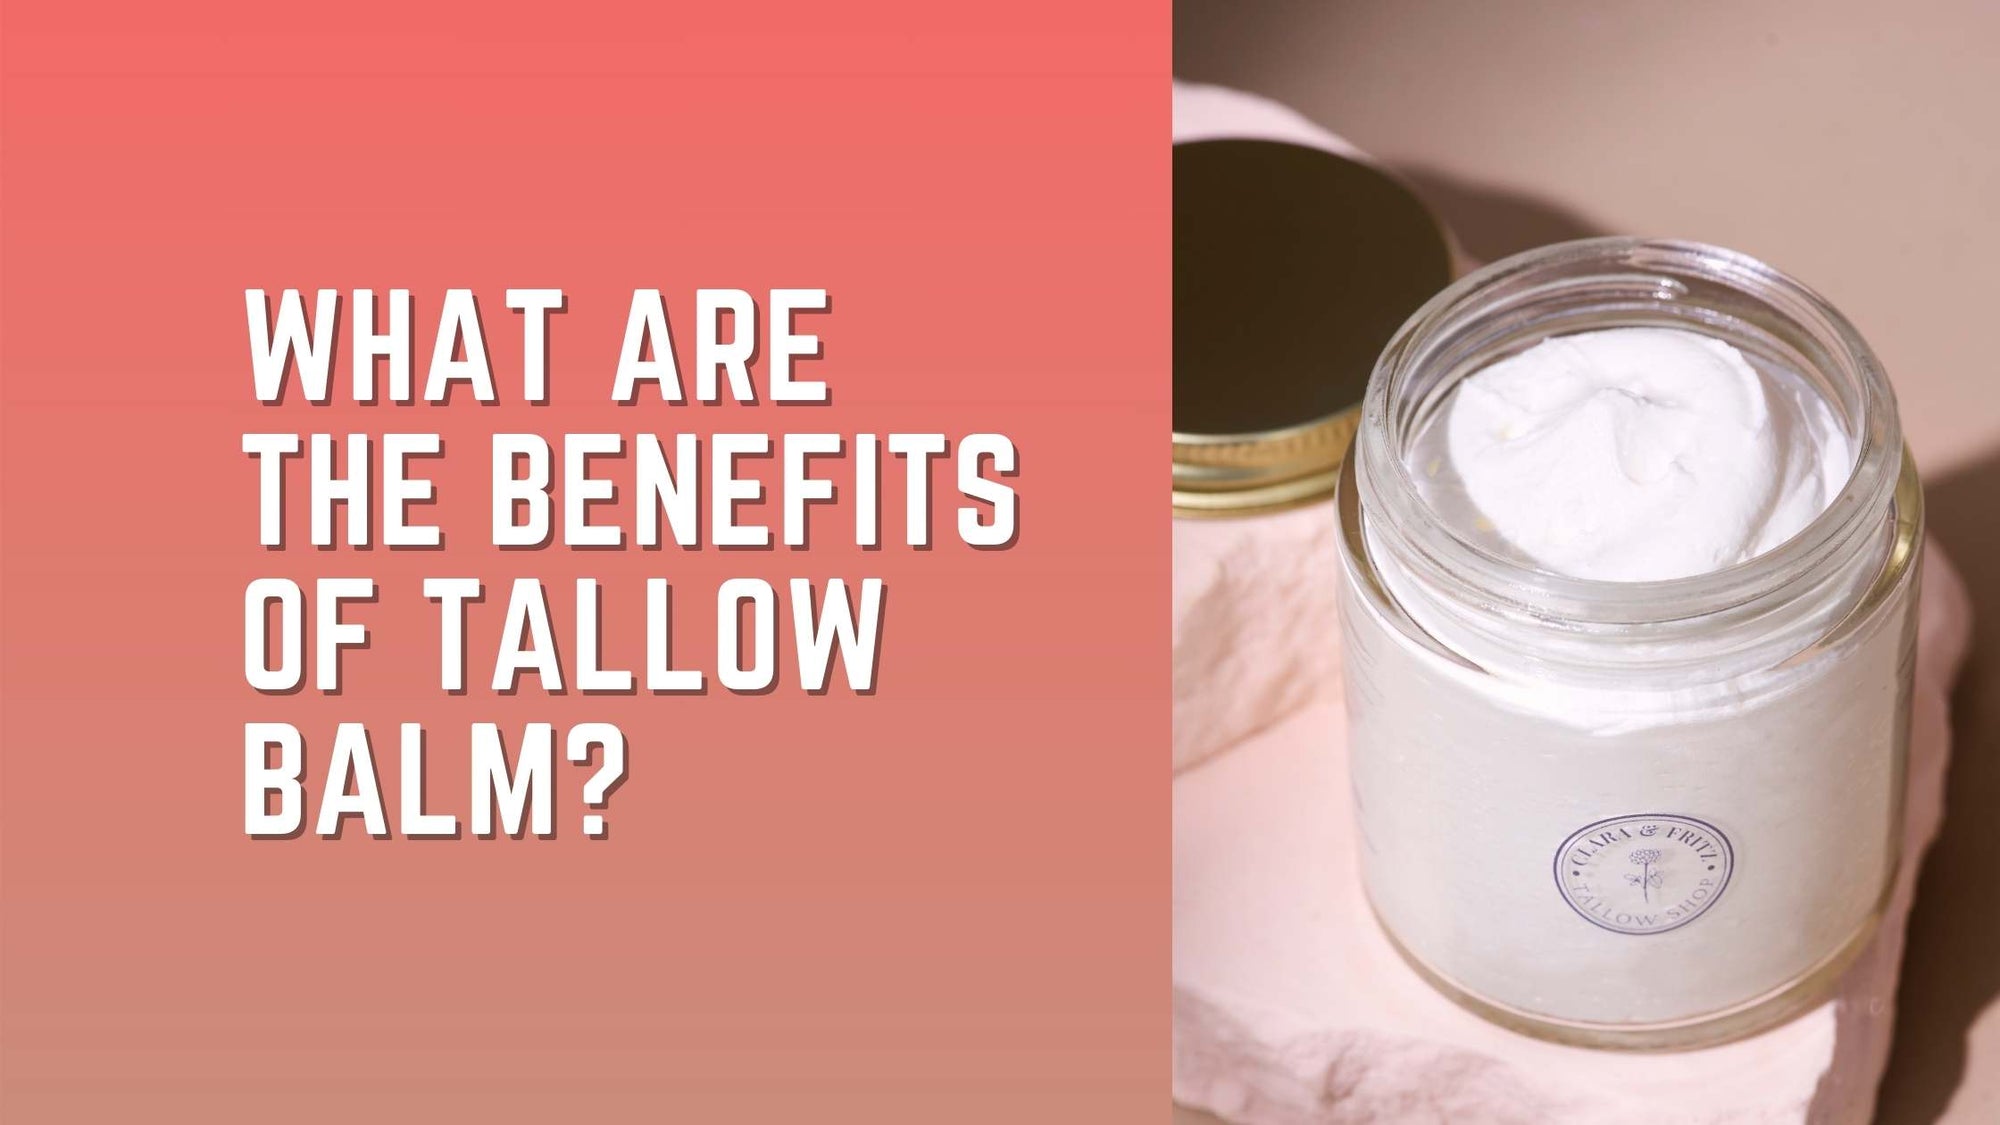 What are the benefits of tallow balm